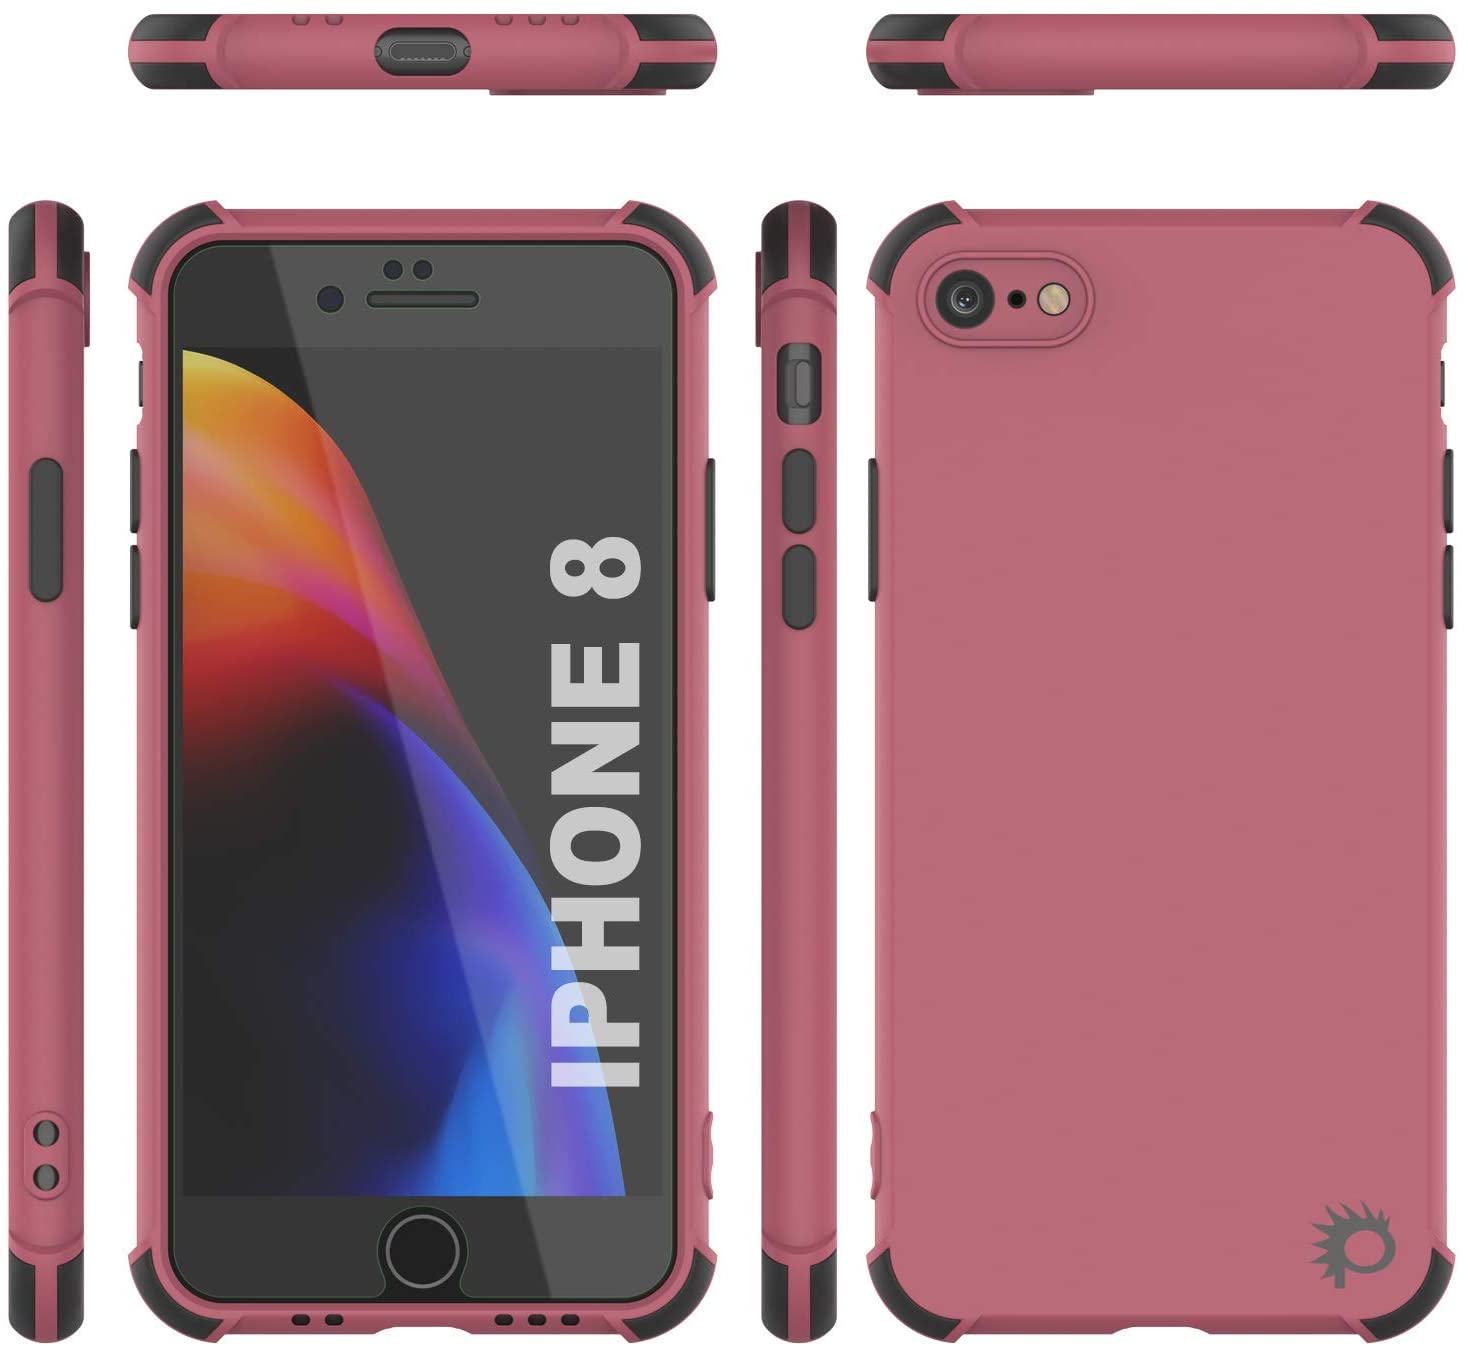 Punkcase Protective & Lightweight TPU Case [Sunshine Series] for iPhone 8 [Rose]